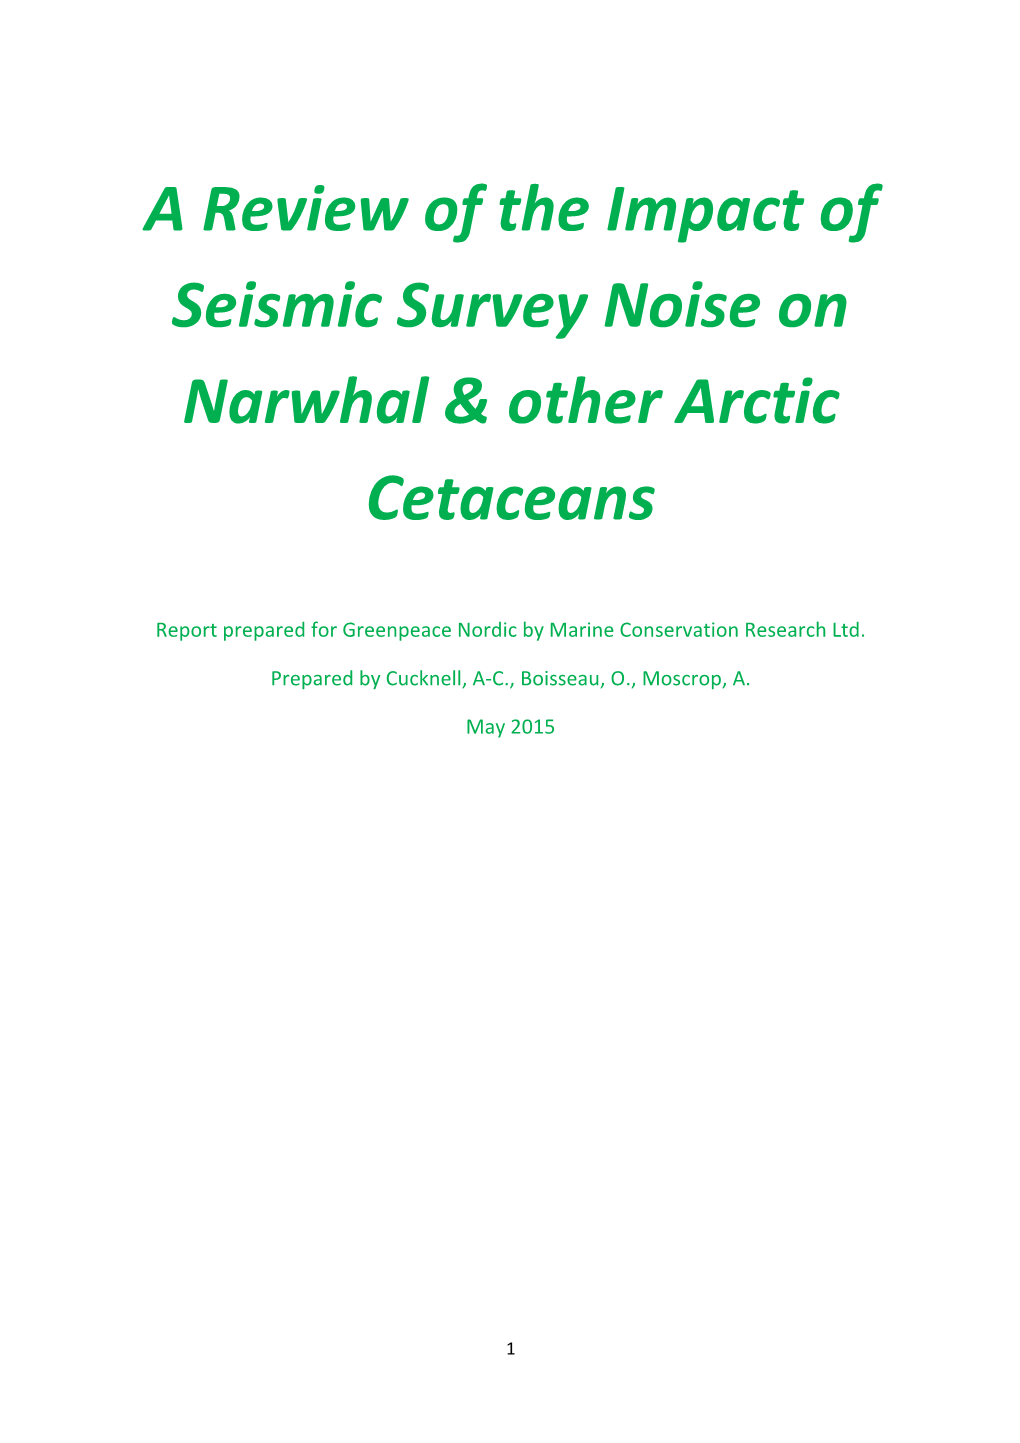 A Review of the Impact of Seismic Survey Noise on Narwhal & Other